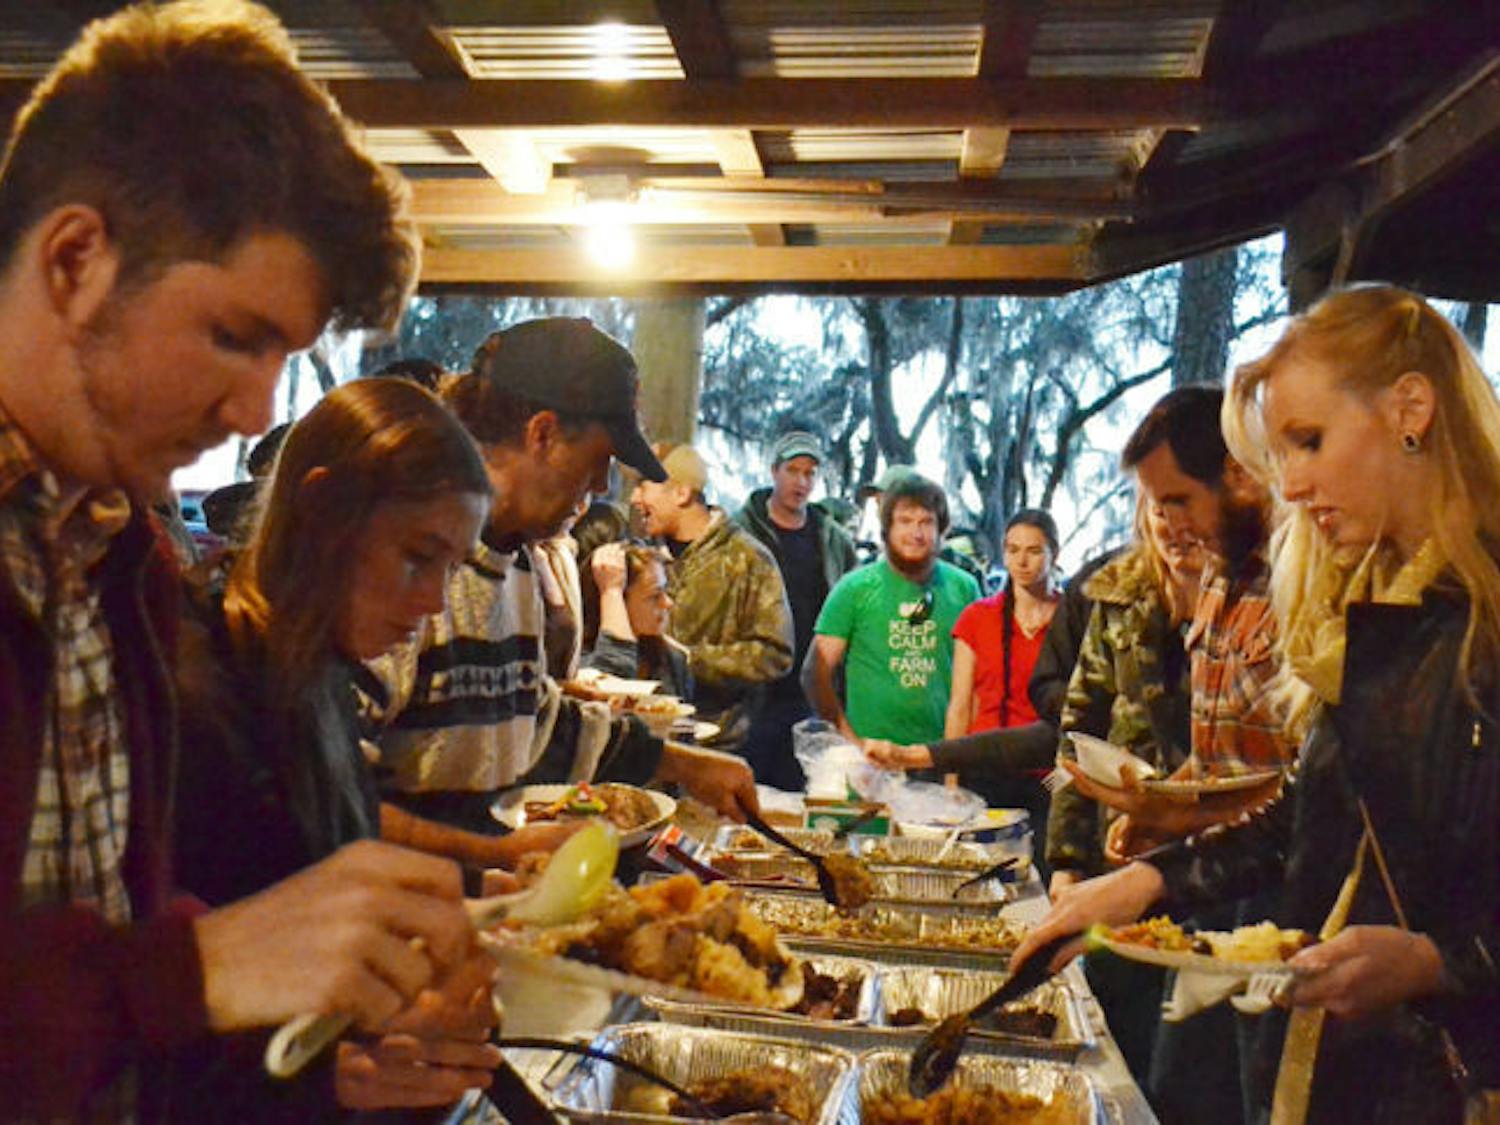 People line up for a buffet of wild game at the 31st Annual Beast Feast on Saturday. The event, with dishes such as pheasant, boar and venison, benefited the UF Wildlife Society.